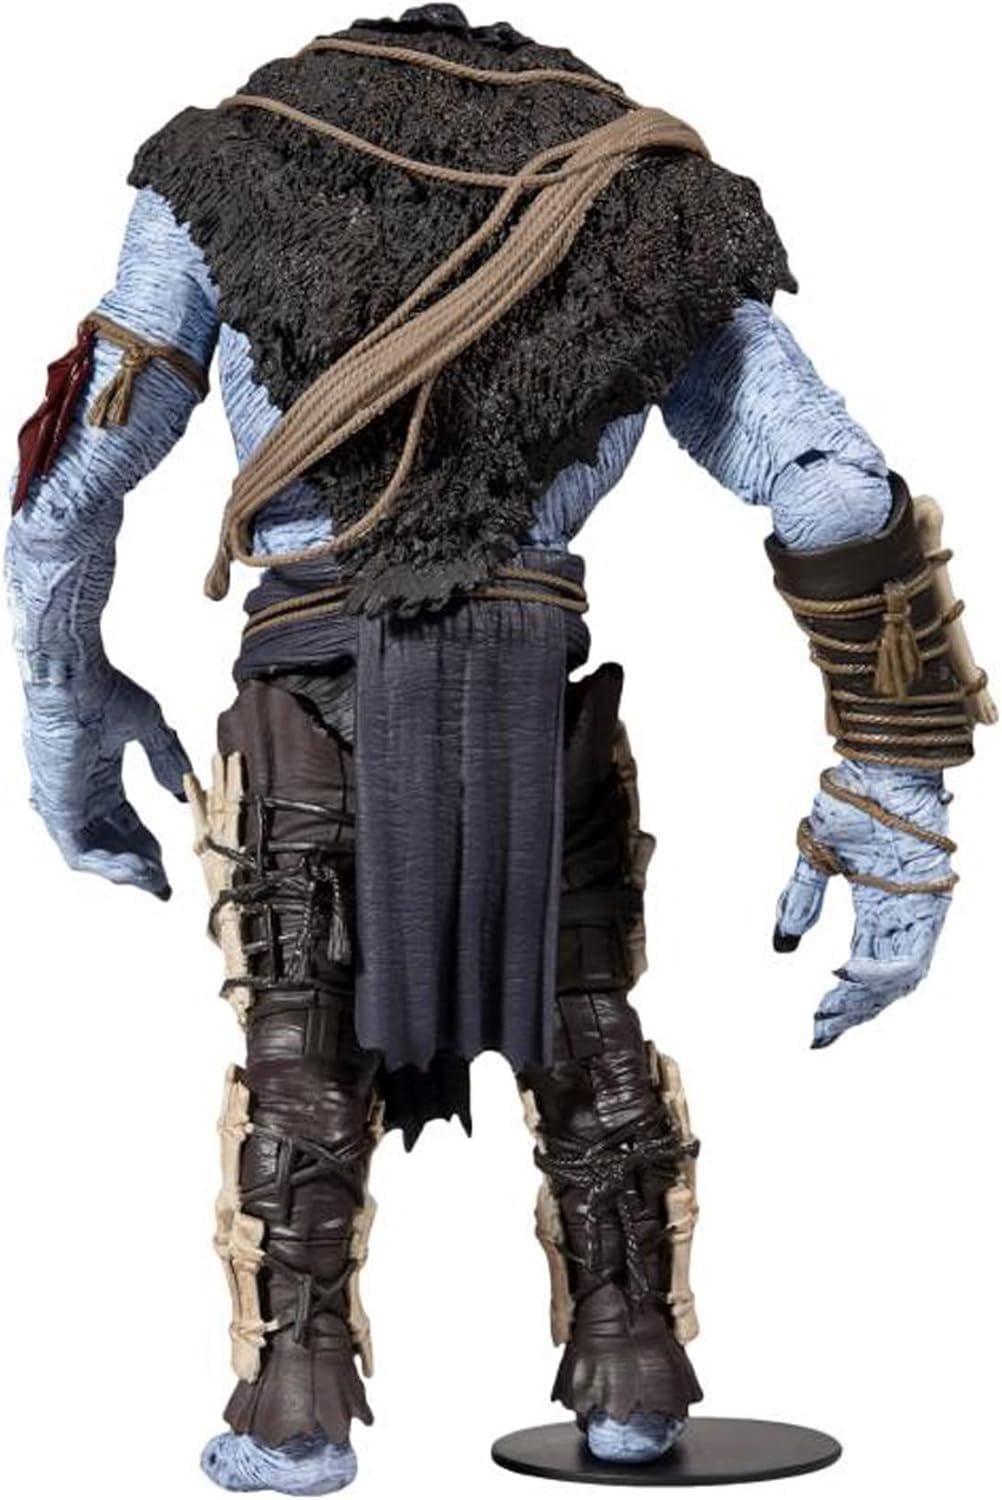 ACTION FIGURE ICE GIANT MEGAFIG 30 CM - THE WITCHER - Magic Dreams Store